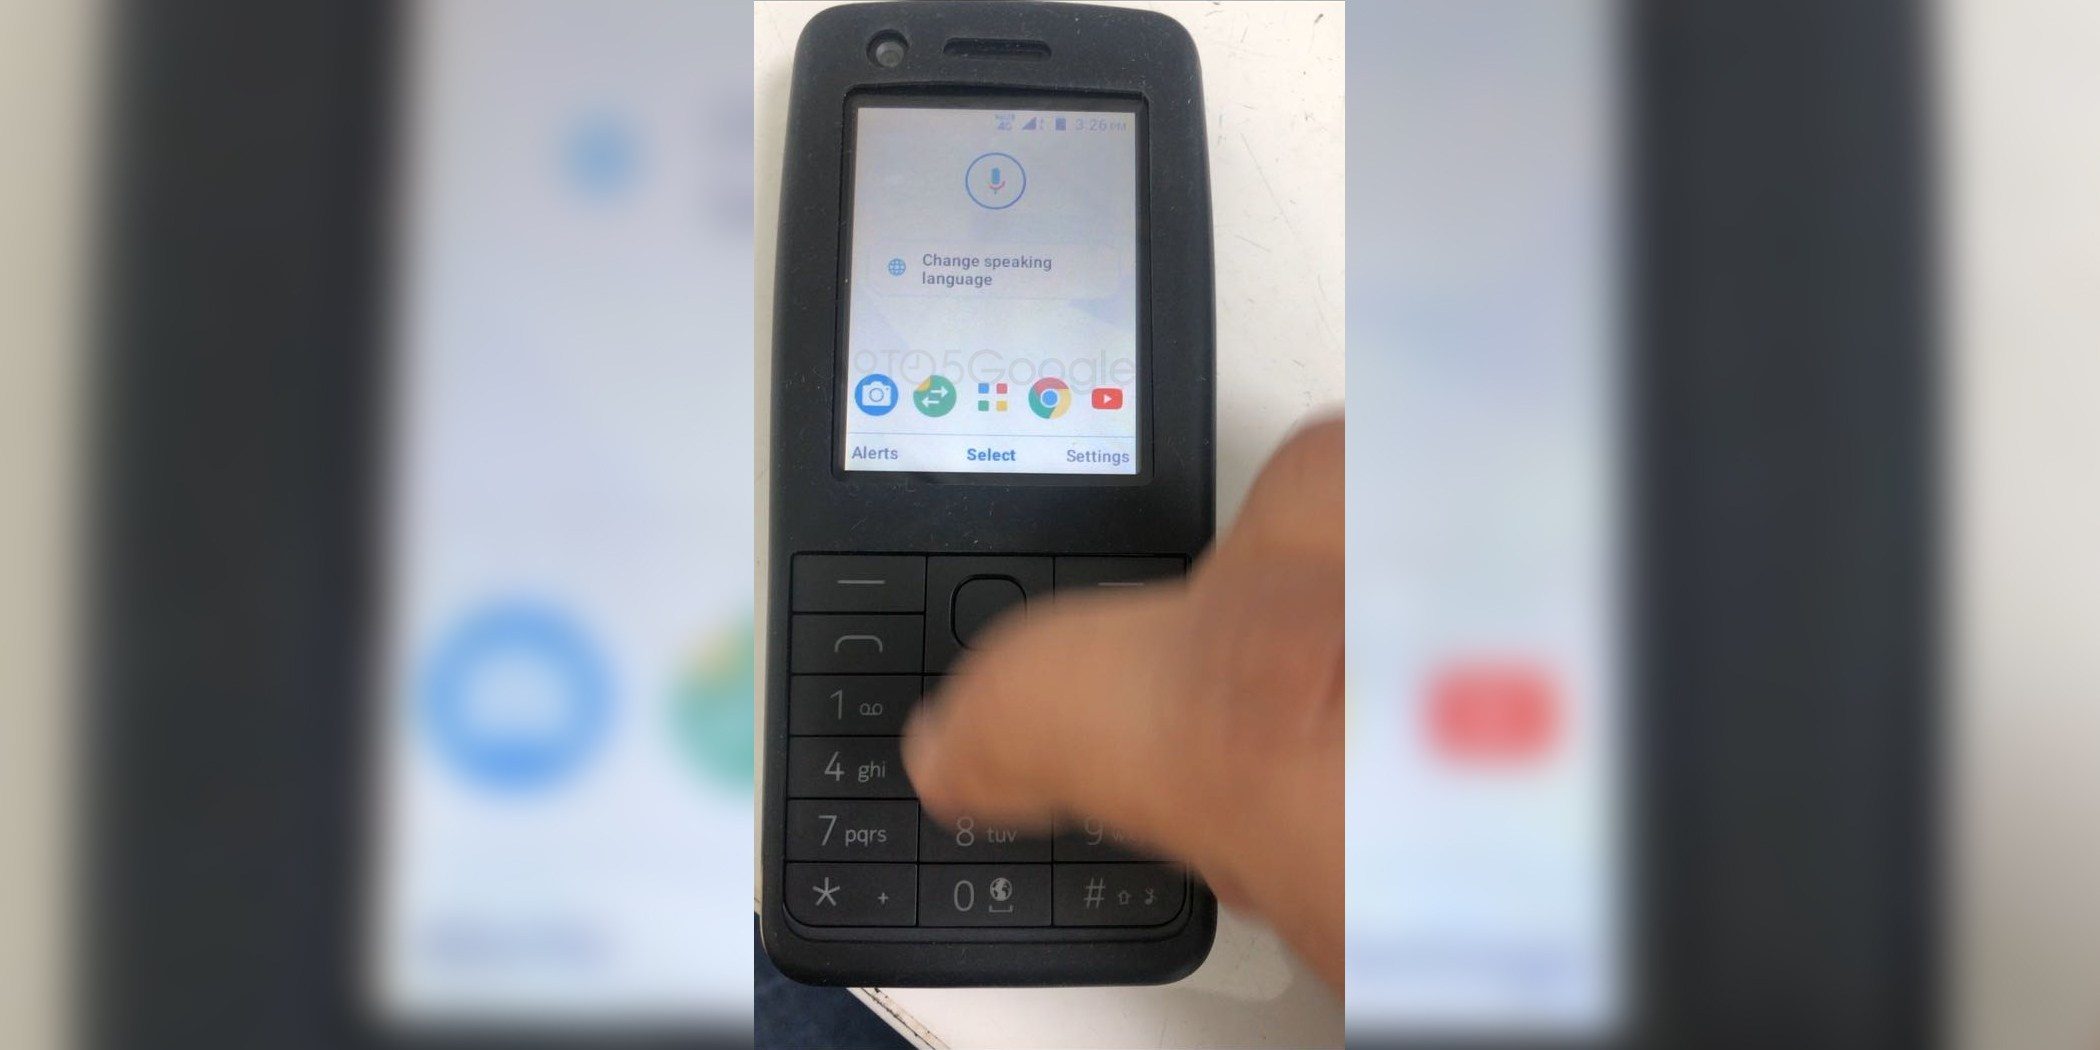 This is apparently a Nokia feature phone running Android